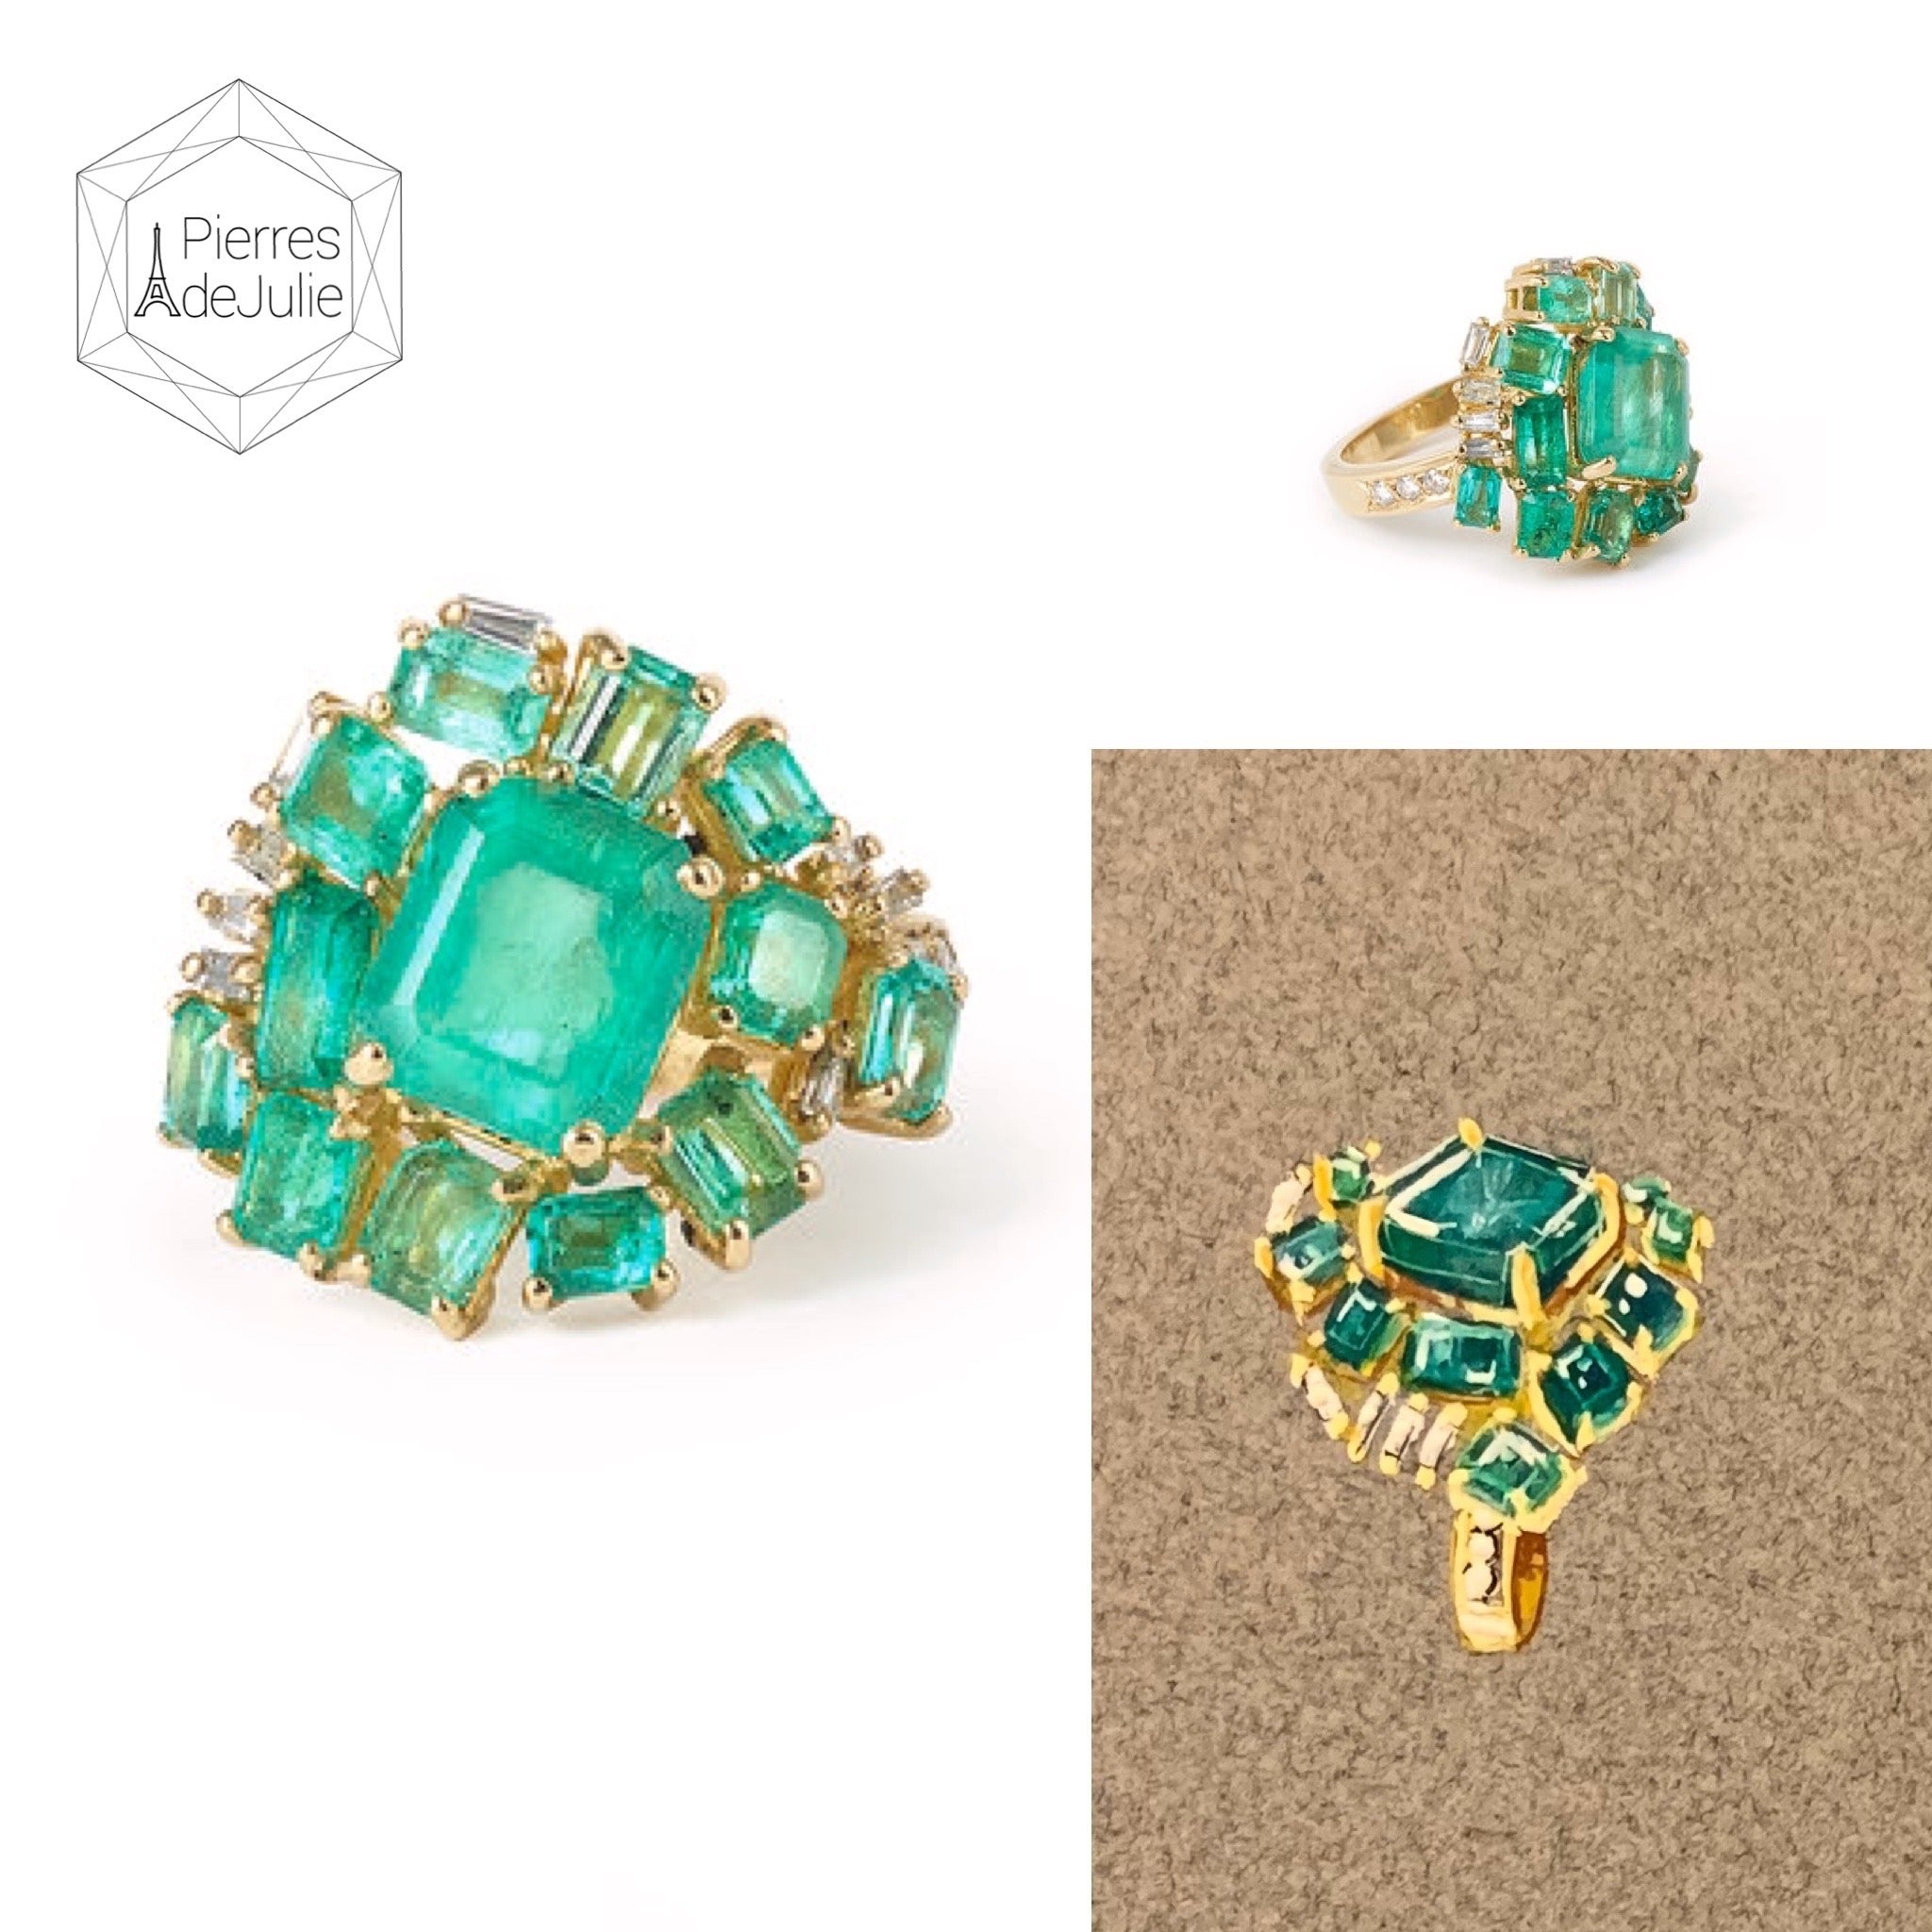 Certified 4.20 Carats Colombian Emerald Diamonds And Emeralds Paved 18 Carats Yellow Gold Ring